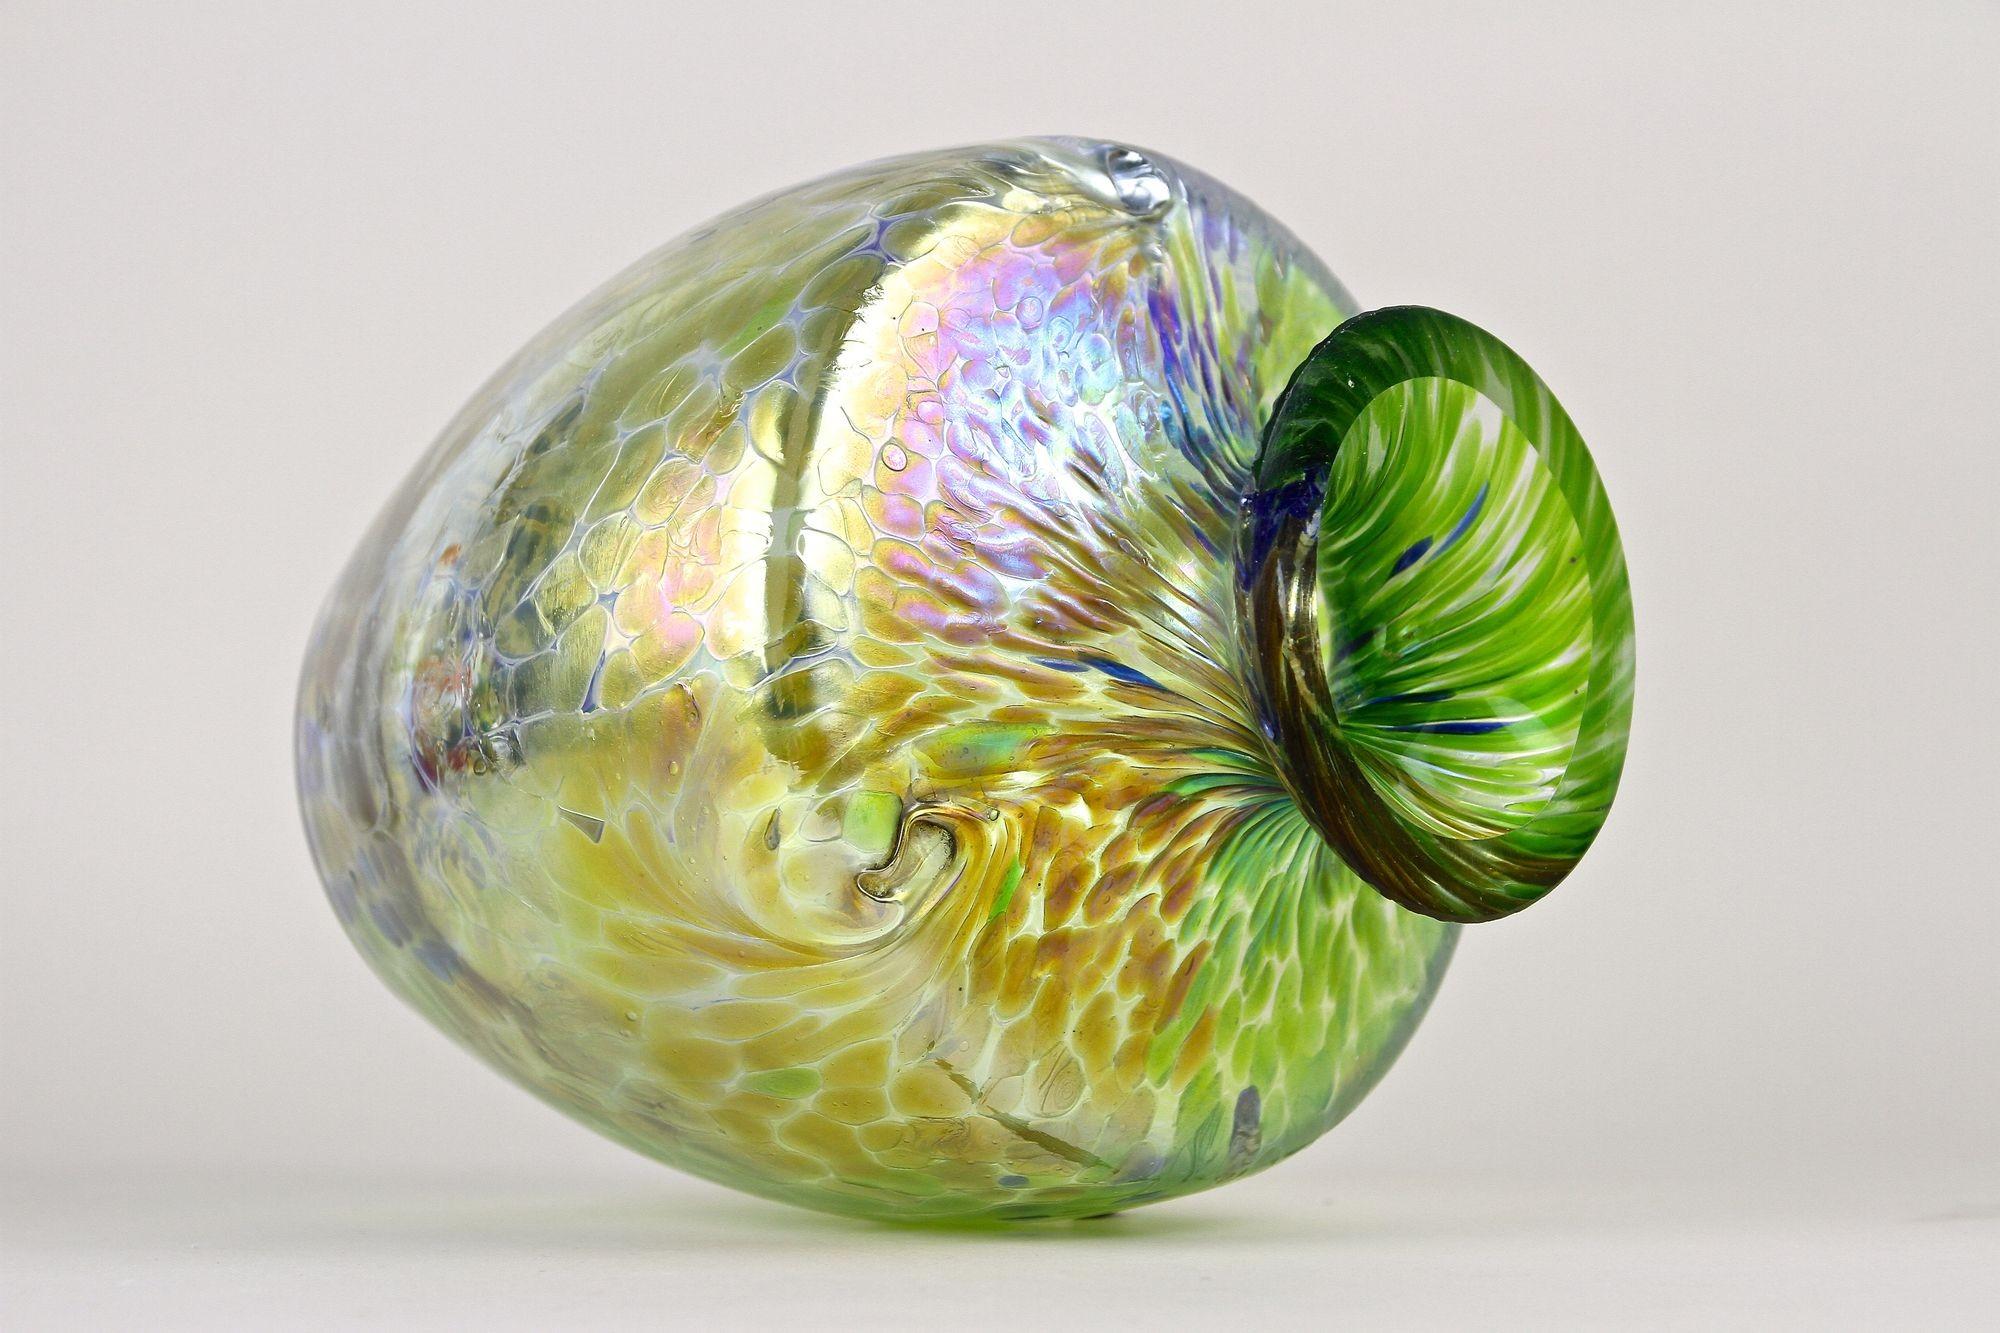 Iridescent Art Nouveau Glass Vase Attributed To Fritz Heckert, Bohemia ca. 1905 For Sale 9